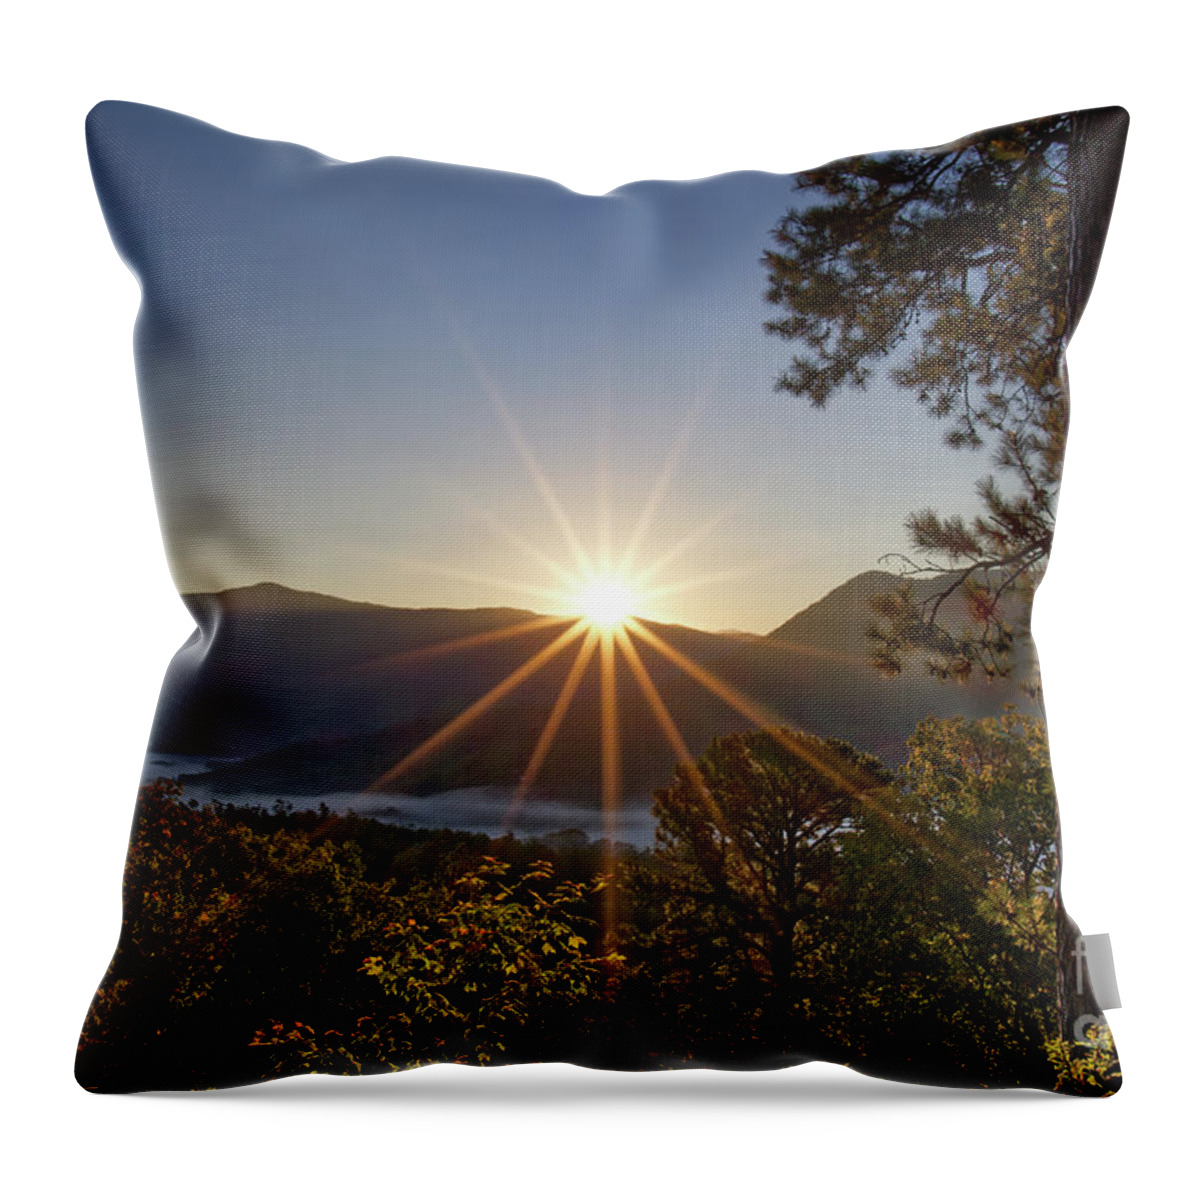 Sunrise Throw Pillow featuring the photograph Sunrise In The Smokies 2 by Phil Perkins